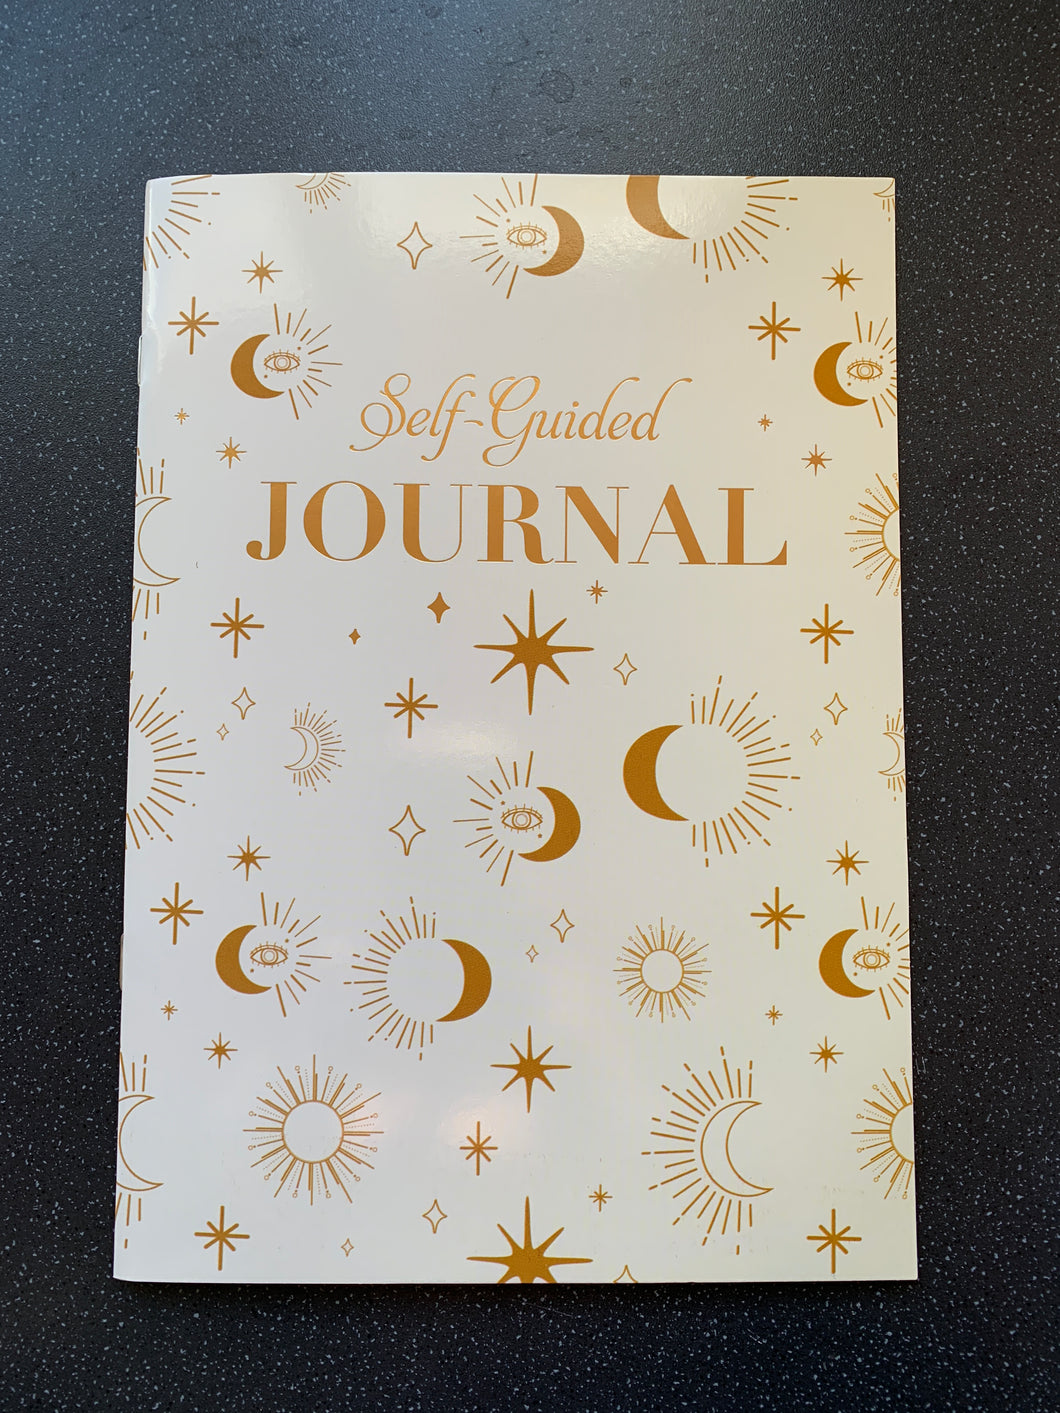 Self Guided Journal For Manifesting Your Dreams & Peace, Mindfulness & Healing 16 Pages